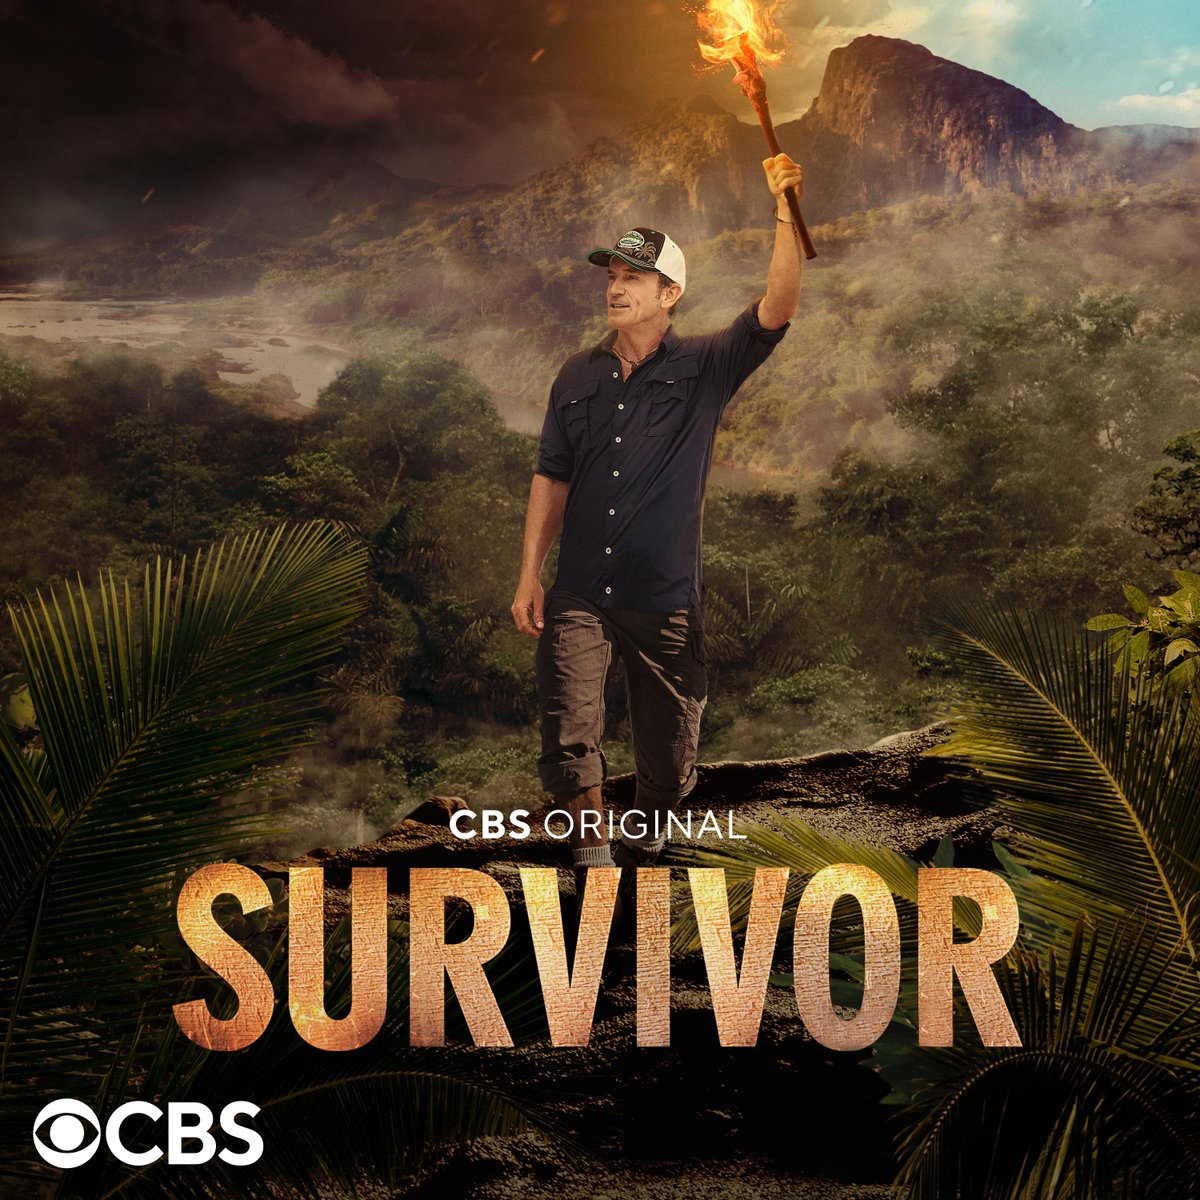 Season 41 is just two weeks away and we can already feel the heat! @JeffProbst is ready! Are you? 👀 #Survivor